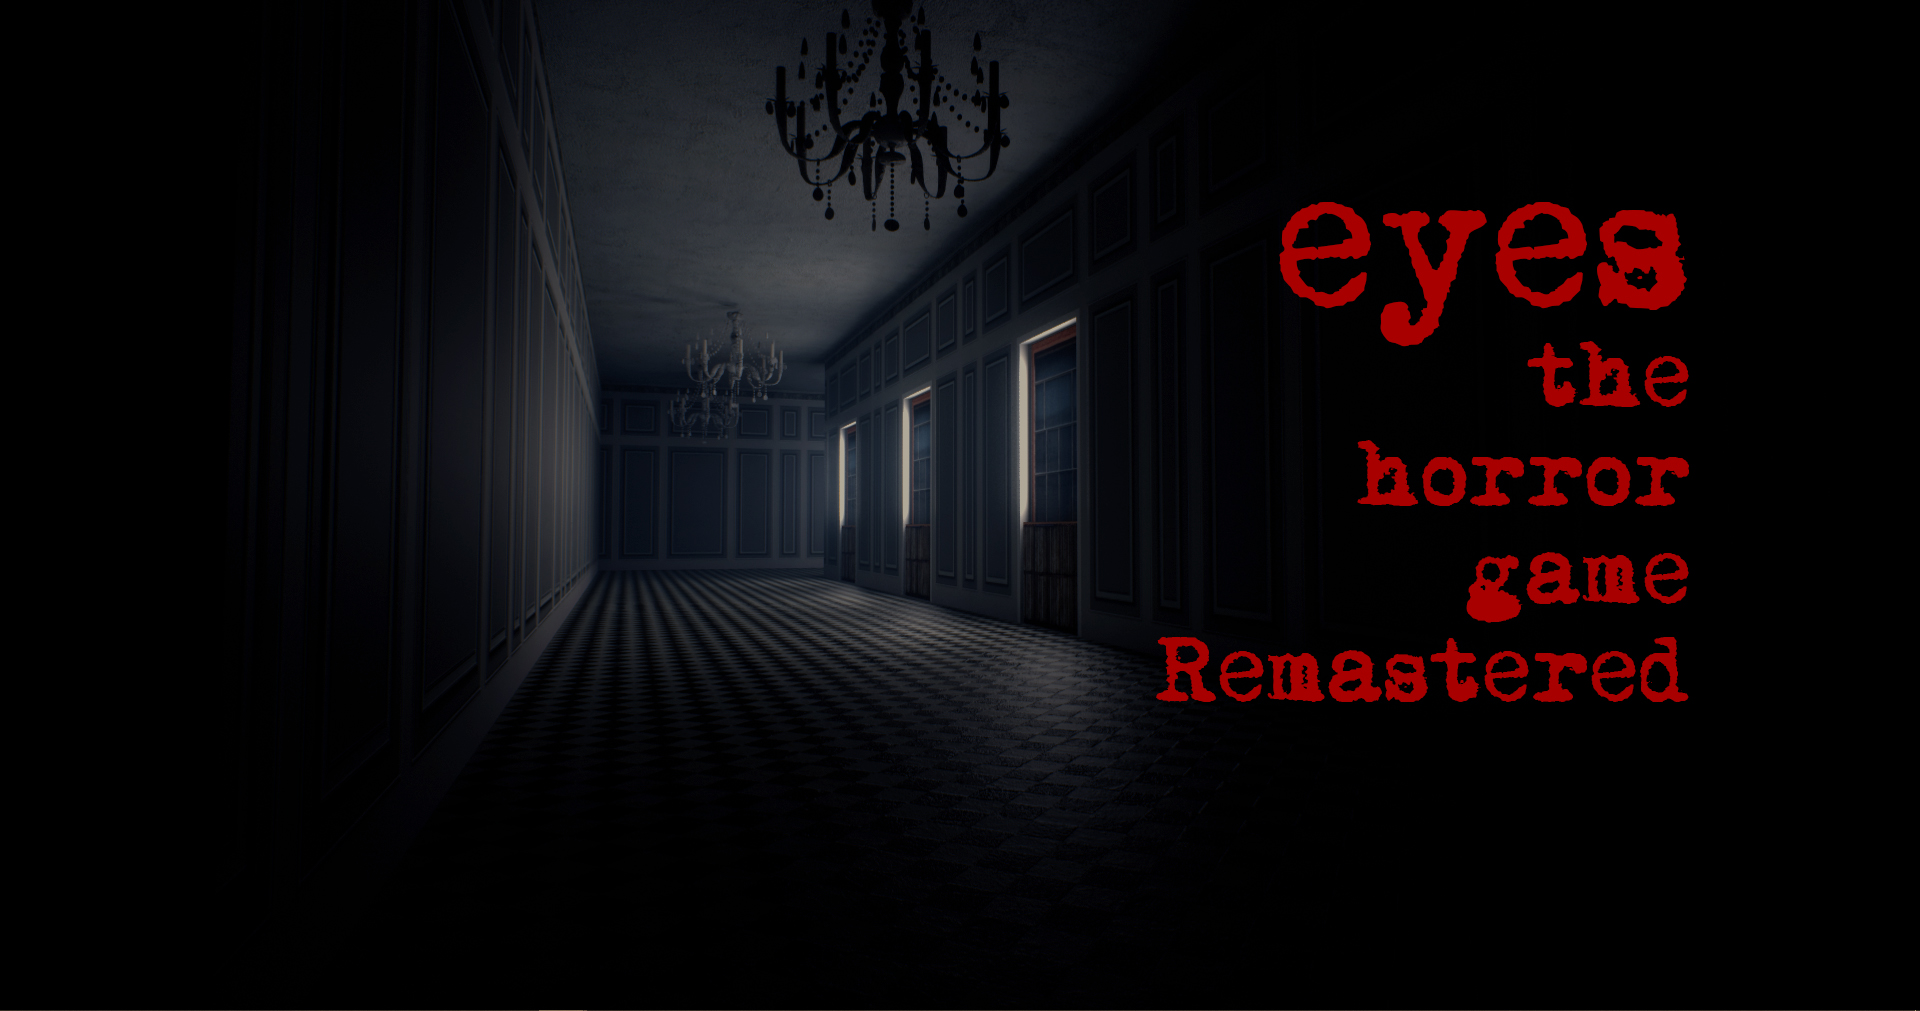 Eyes, a horror game for PC, iOS and Android - Rely on Horror